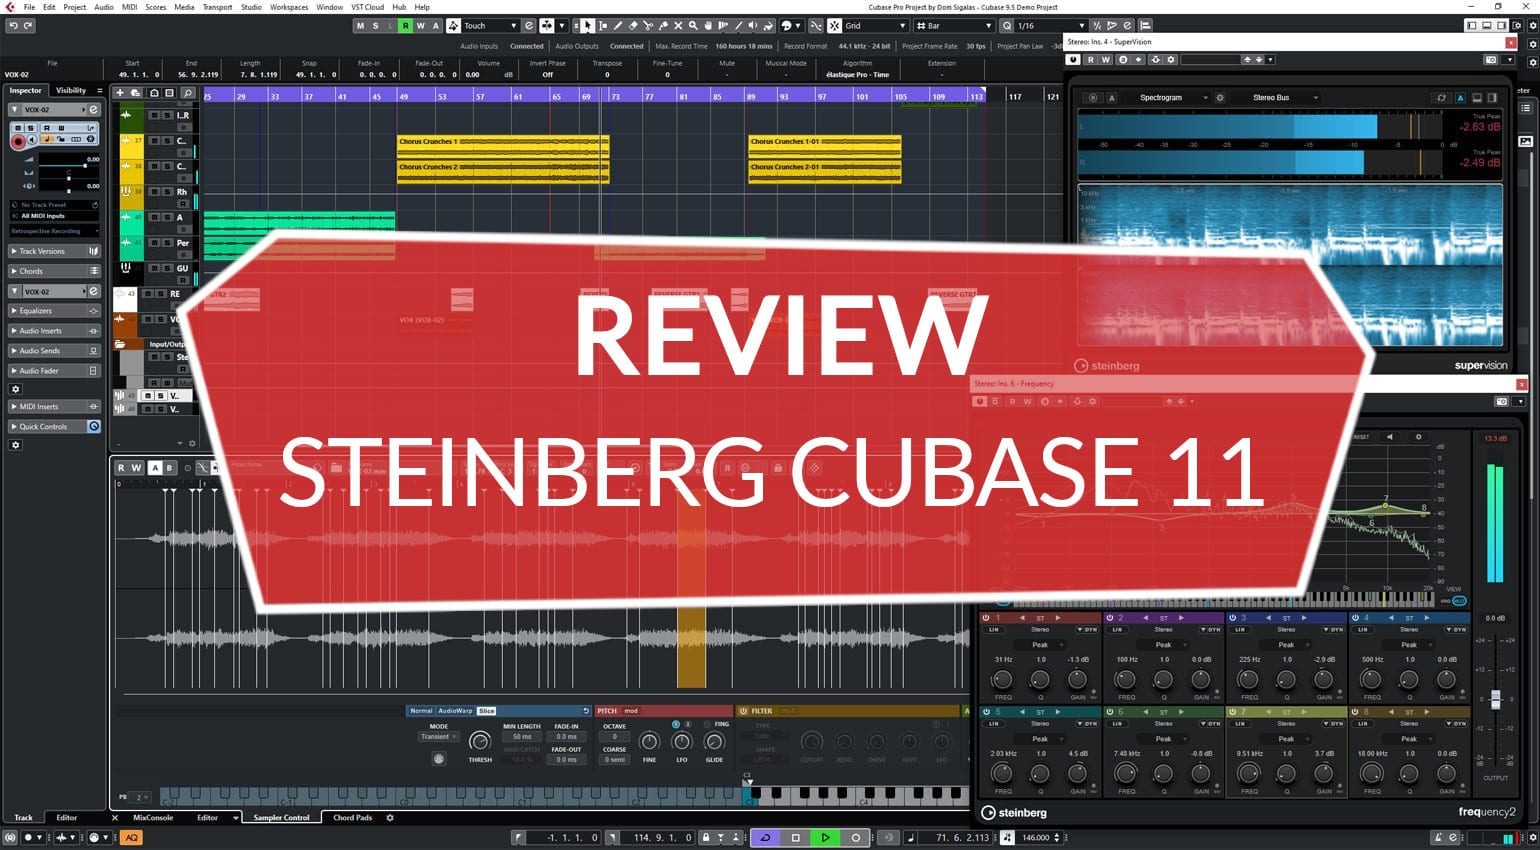 Steinberg Cubase Pro 11: The review - gearnews.com